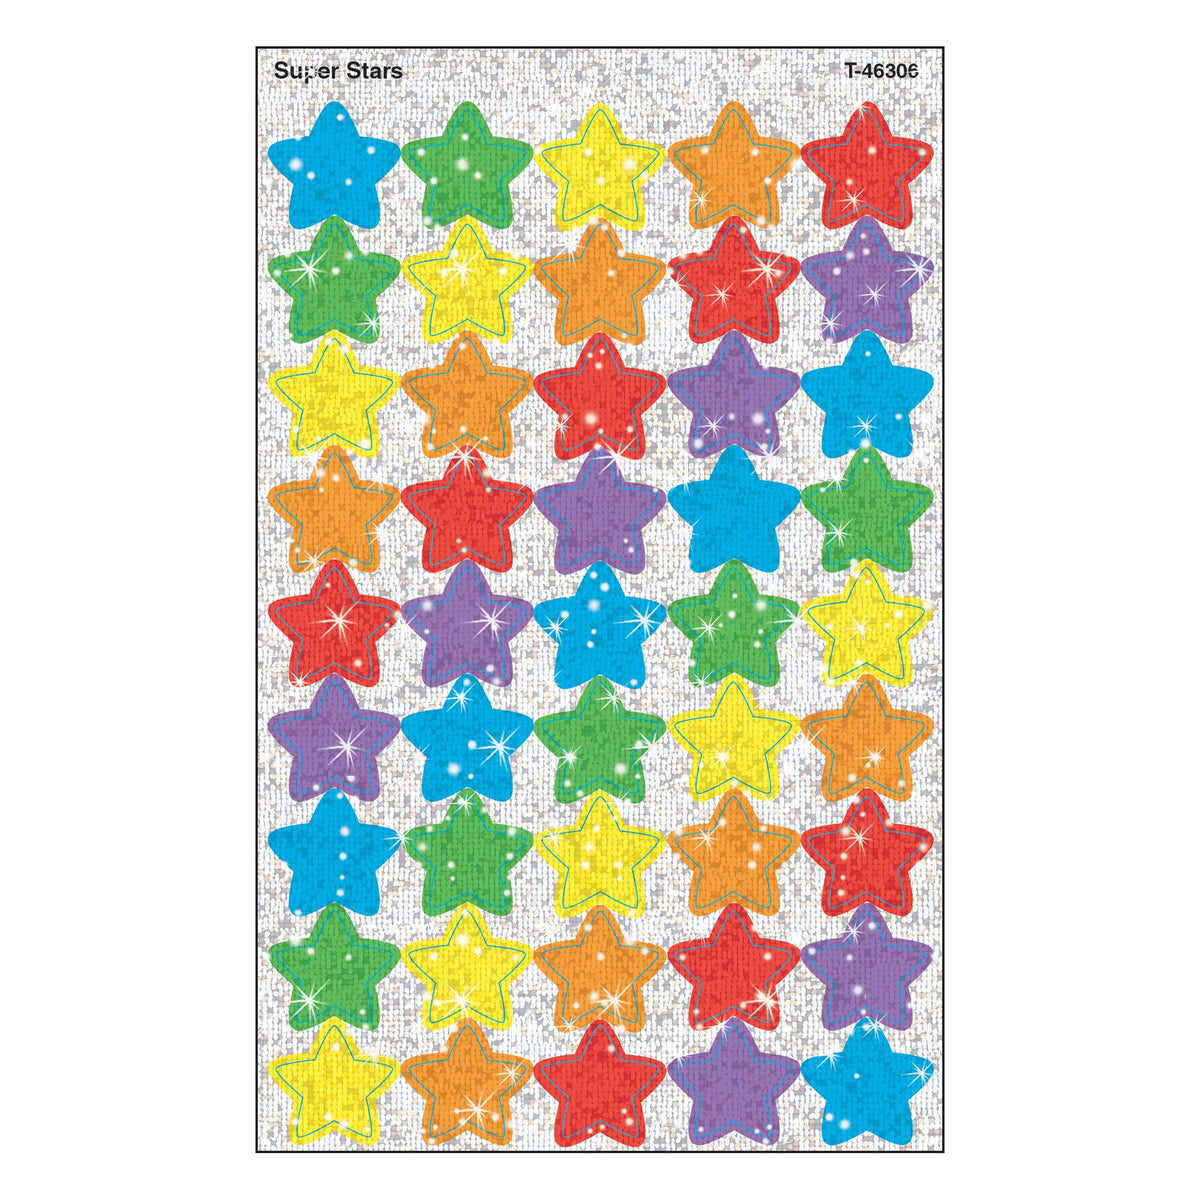 Buy Trend® Sparkle Stickers Stars (Pack of 400) at S&S Worldwide